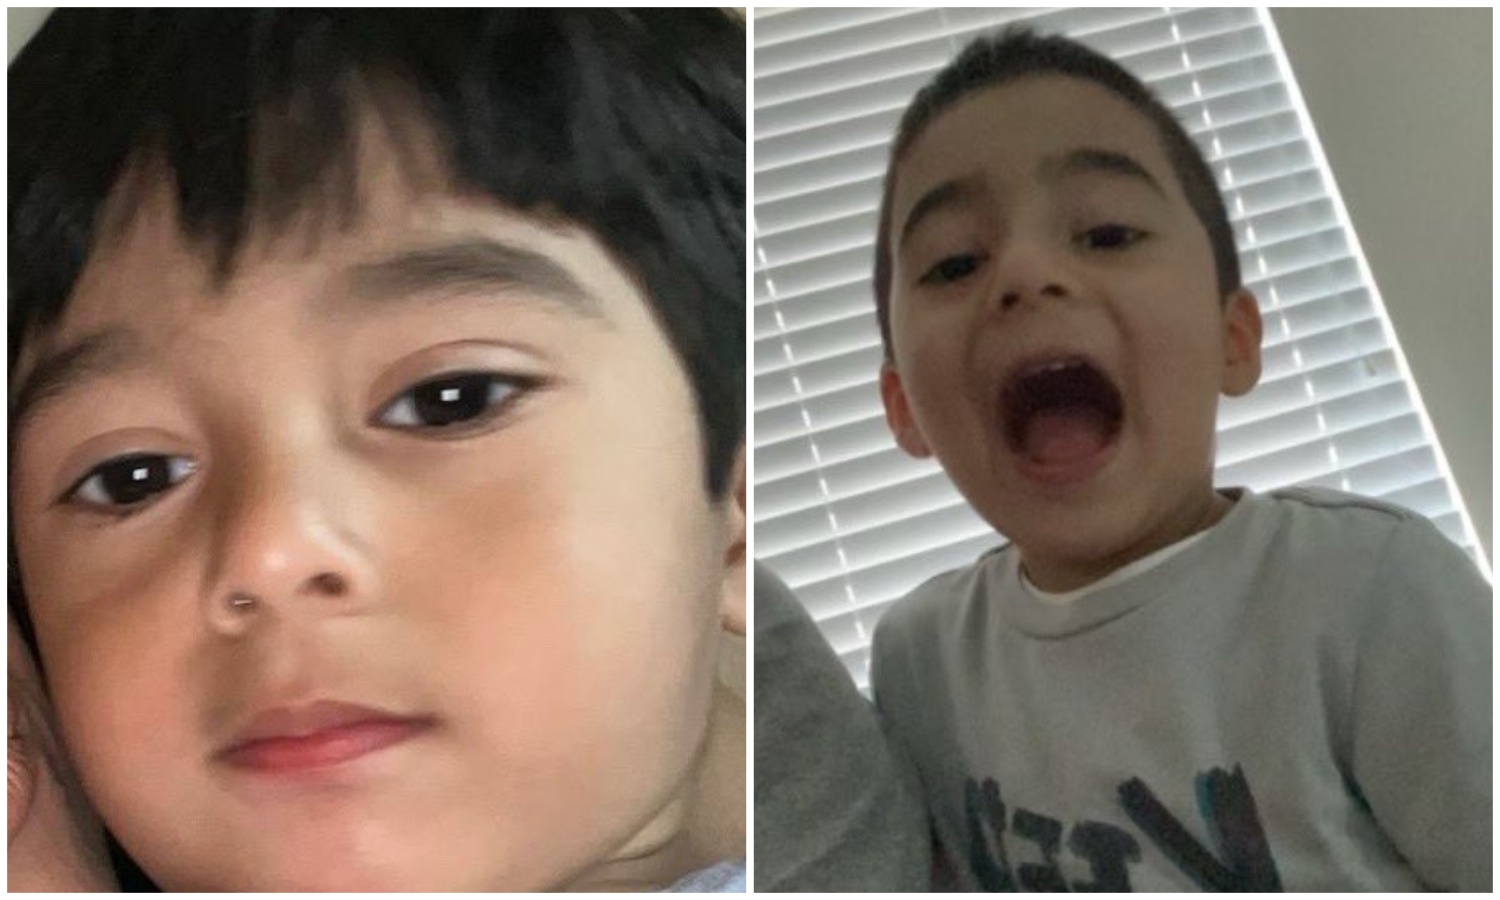 ariel-garcia,-4-years-old,-died-after-a-brutal-attack-by-his-mother,-who-pleaded-not-guilty-to-the-charges